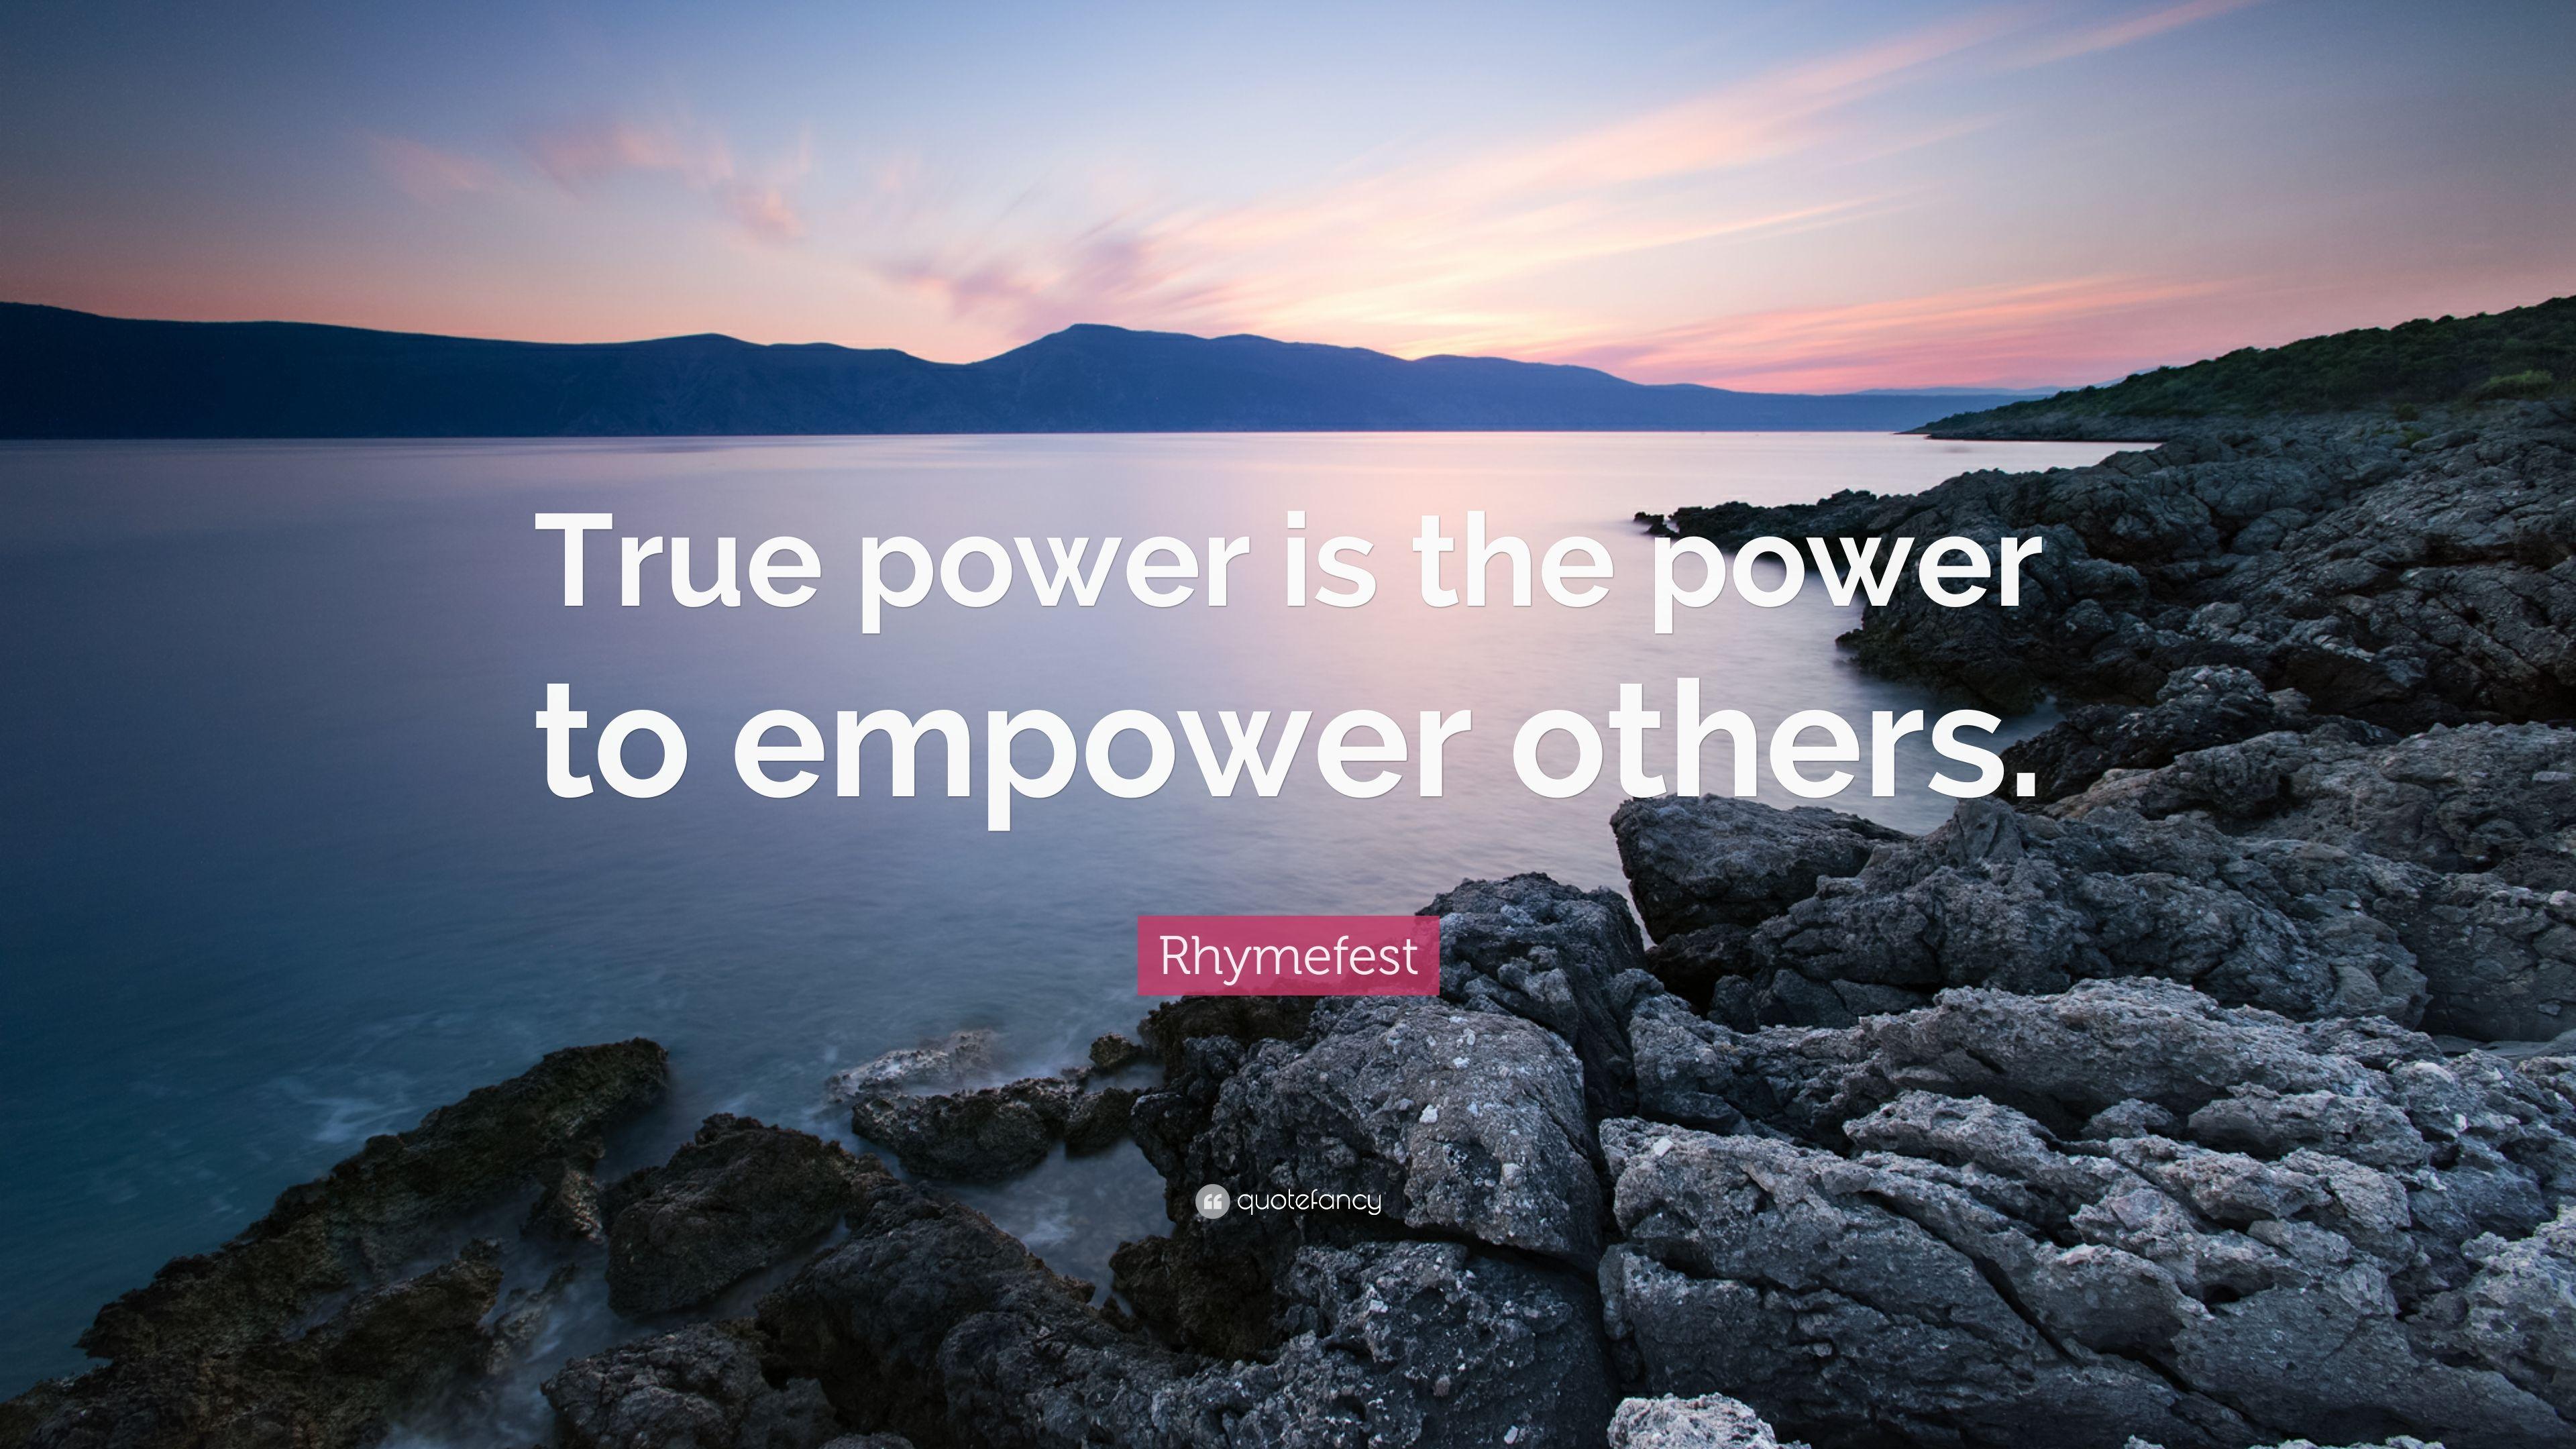 Rhymefest Quote: “True power is the power to empower others.” 7